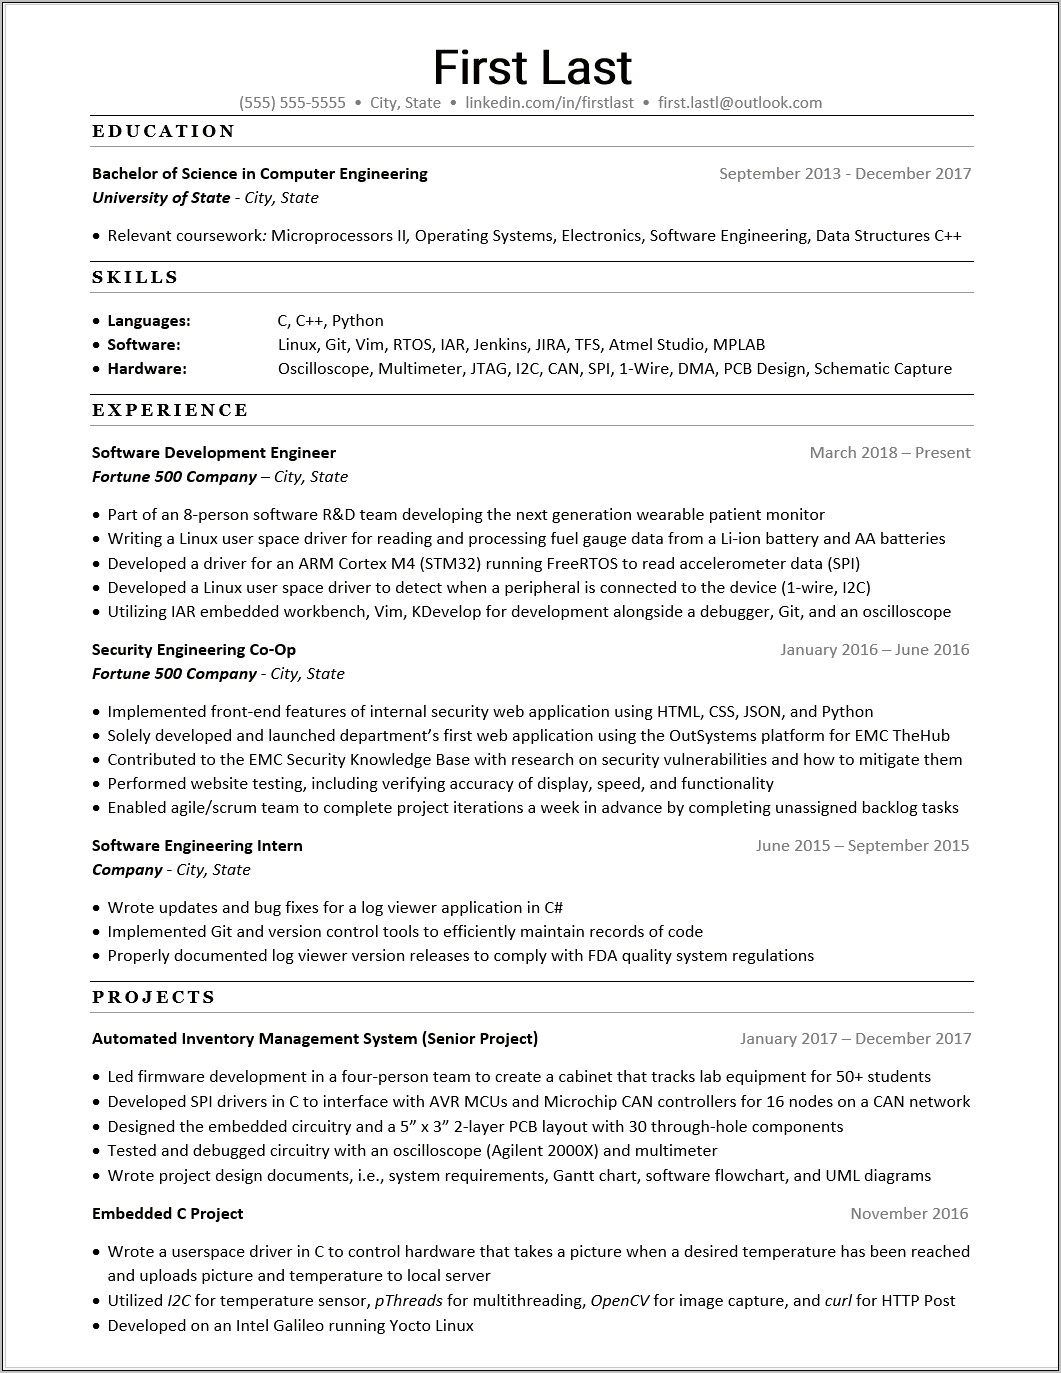 Listing Git Experience On A Resume